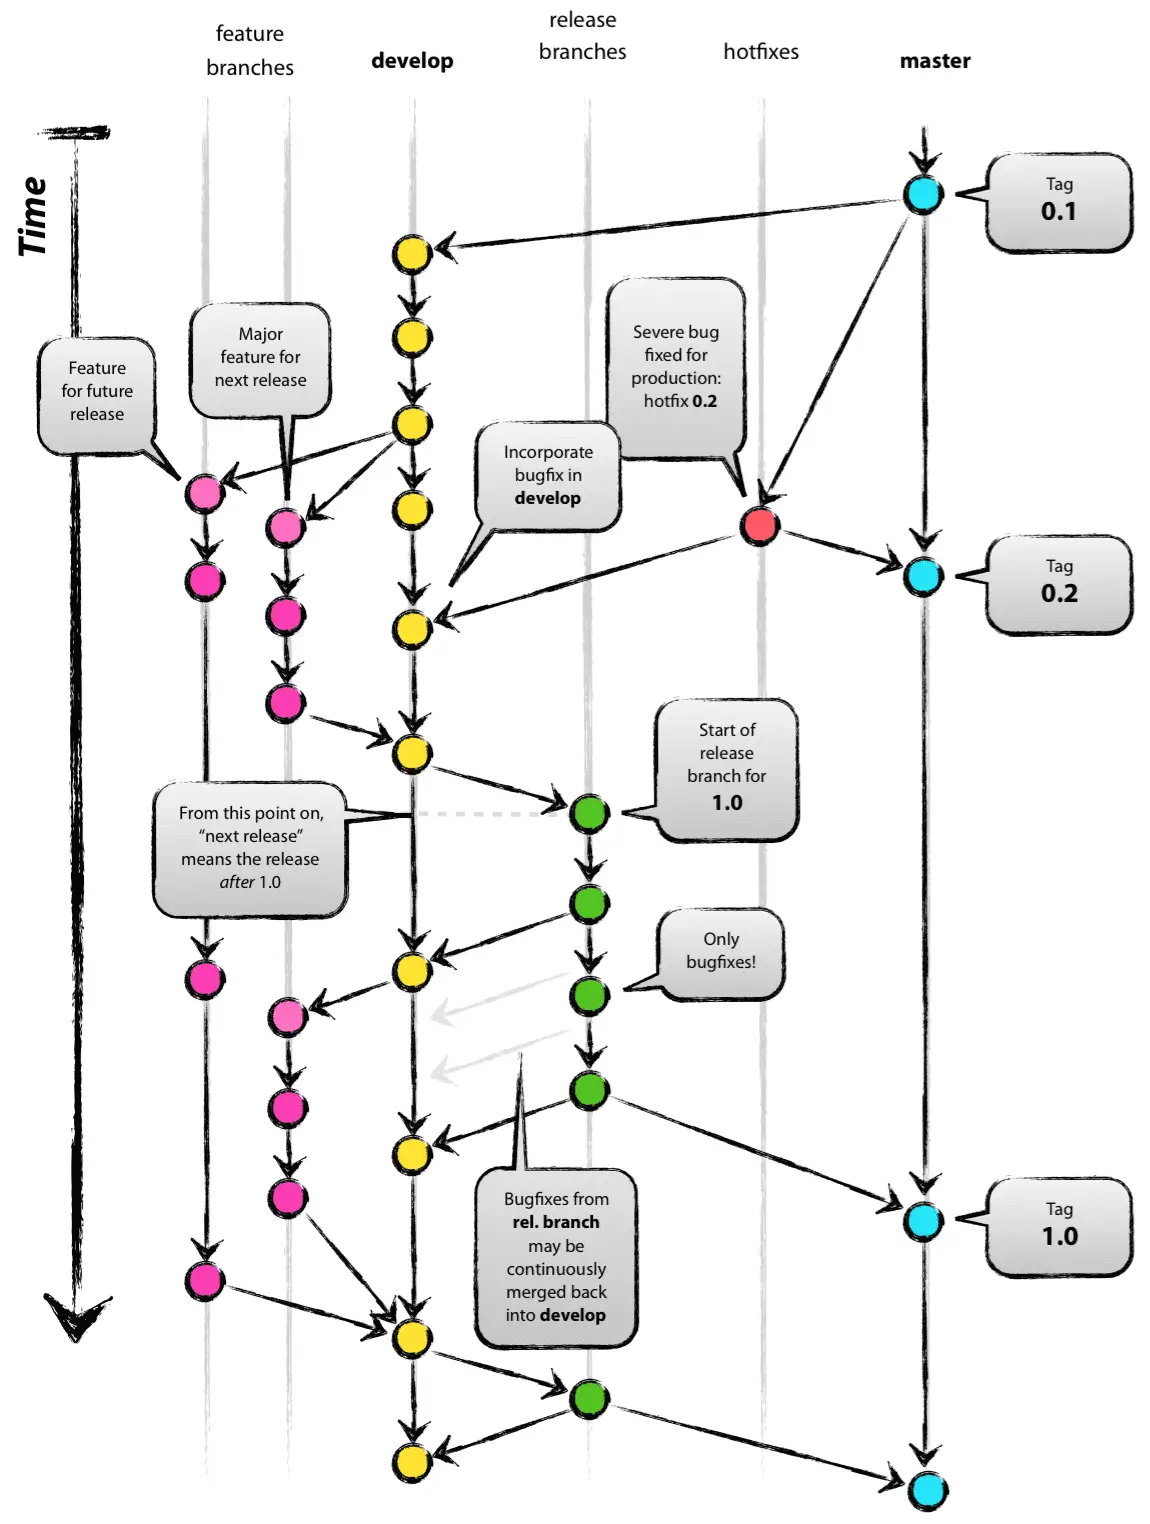 The image shows the GitHub flow diagram. It uses only two branches: main and feature. The features include the development of new functionalities. With them we create the pull request, discussion and improvement suggestions are carried out with the team and, finally, the branch is merged back into main.